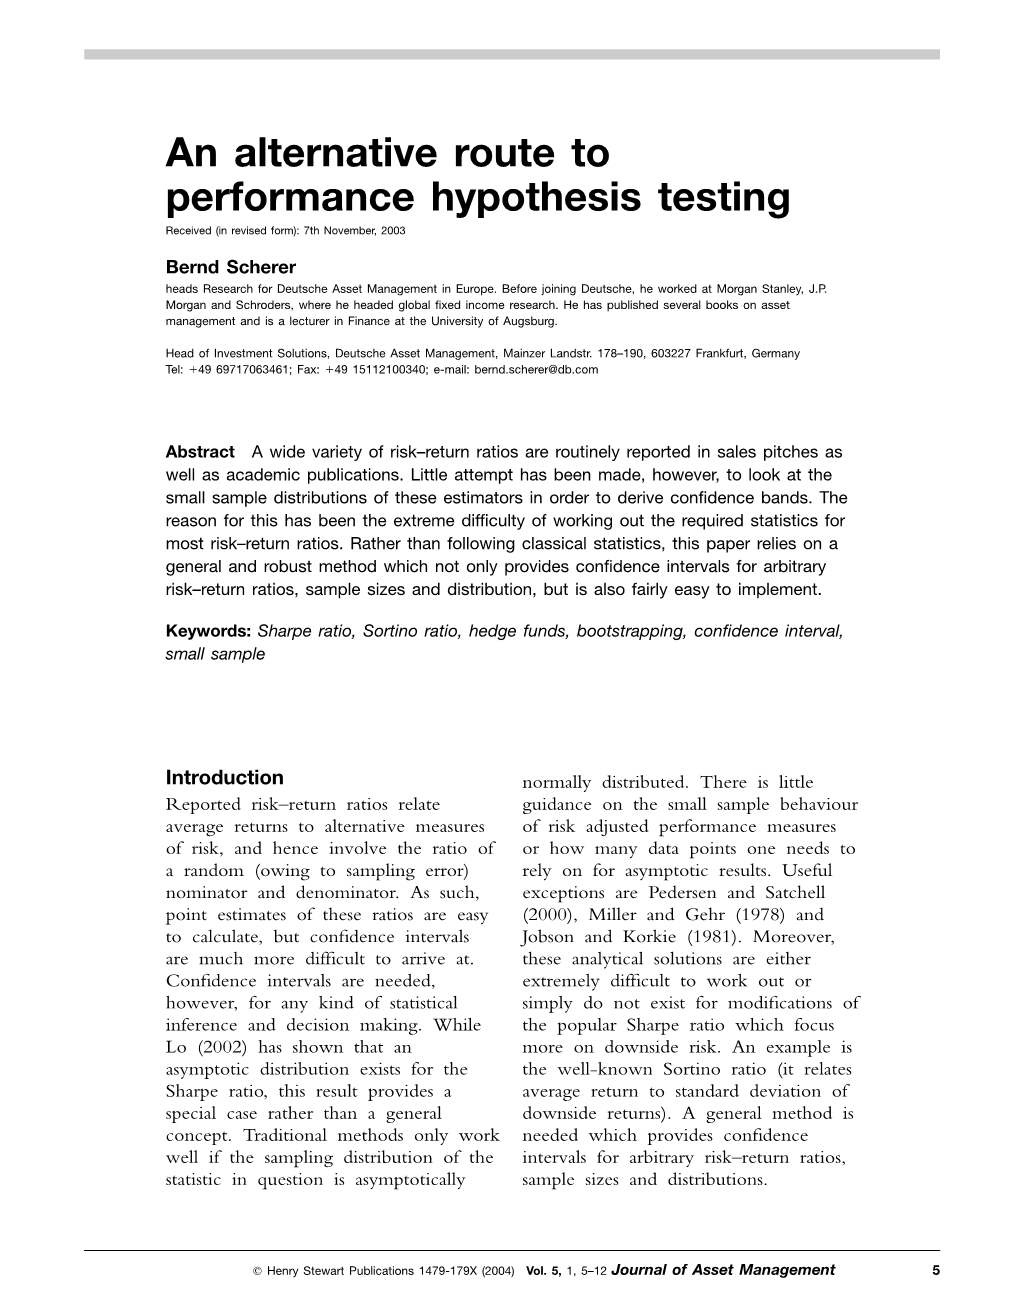 An Alternative Route to Performance Hypothesis Testing Received (In Revised Form): 7Th November, 2003